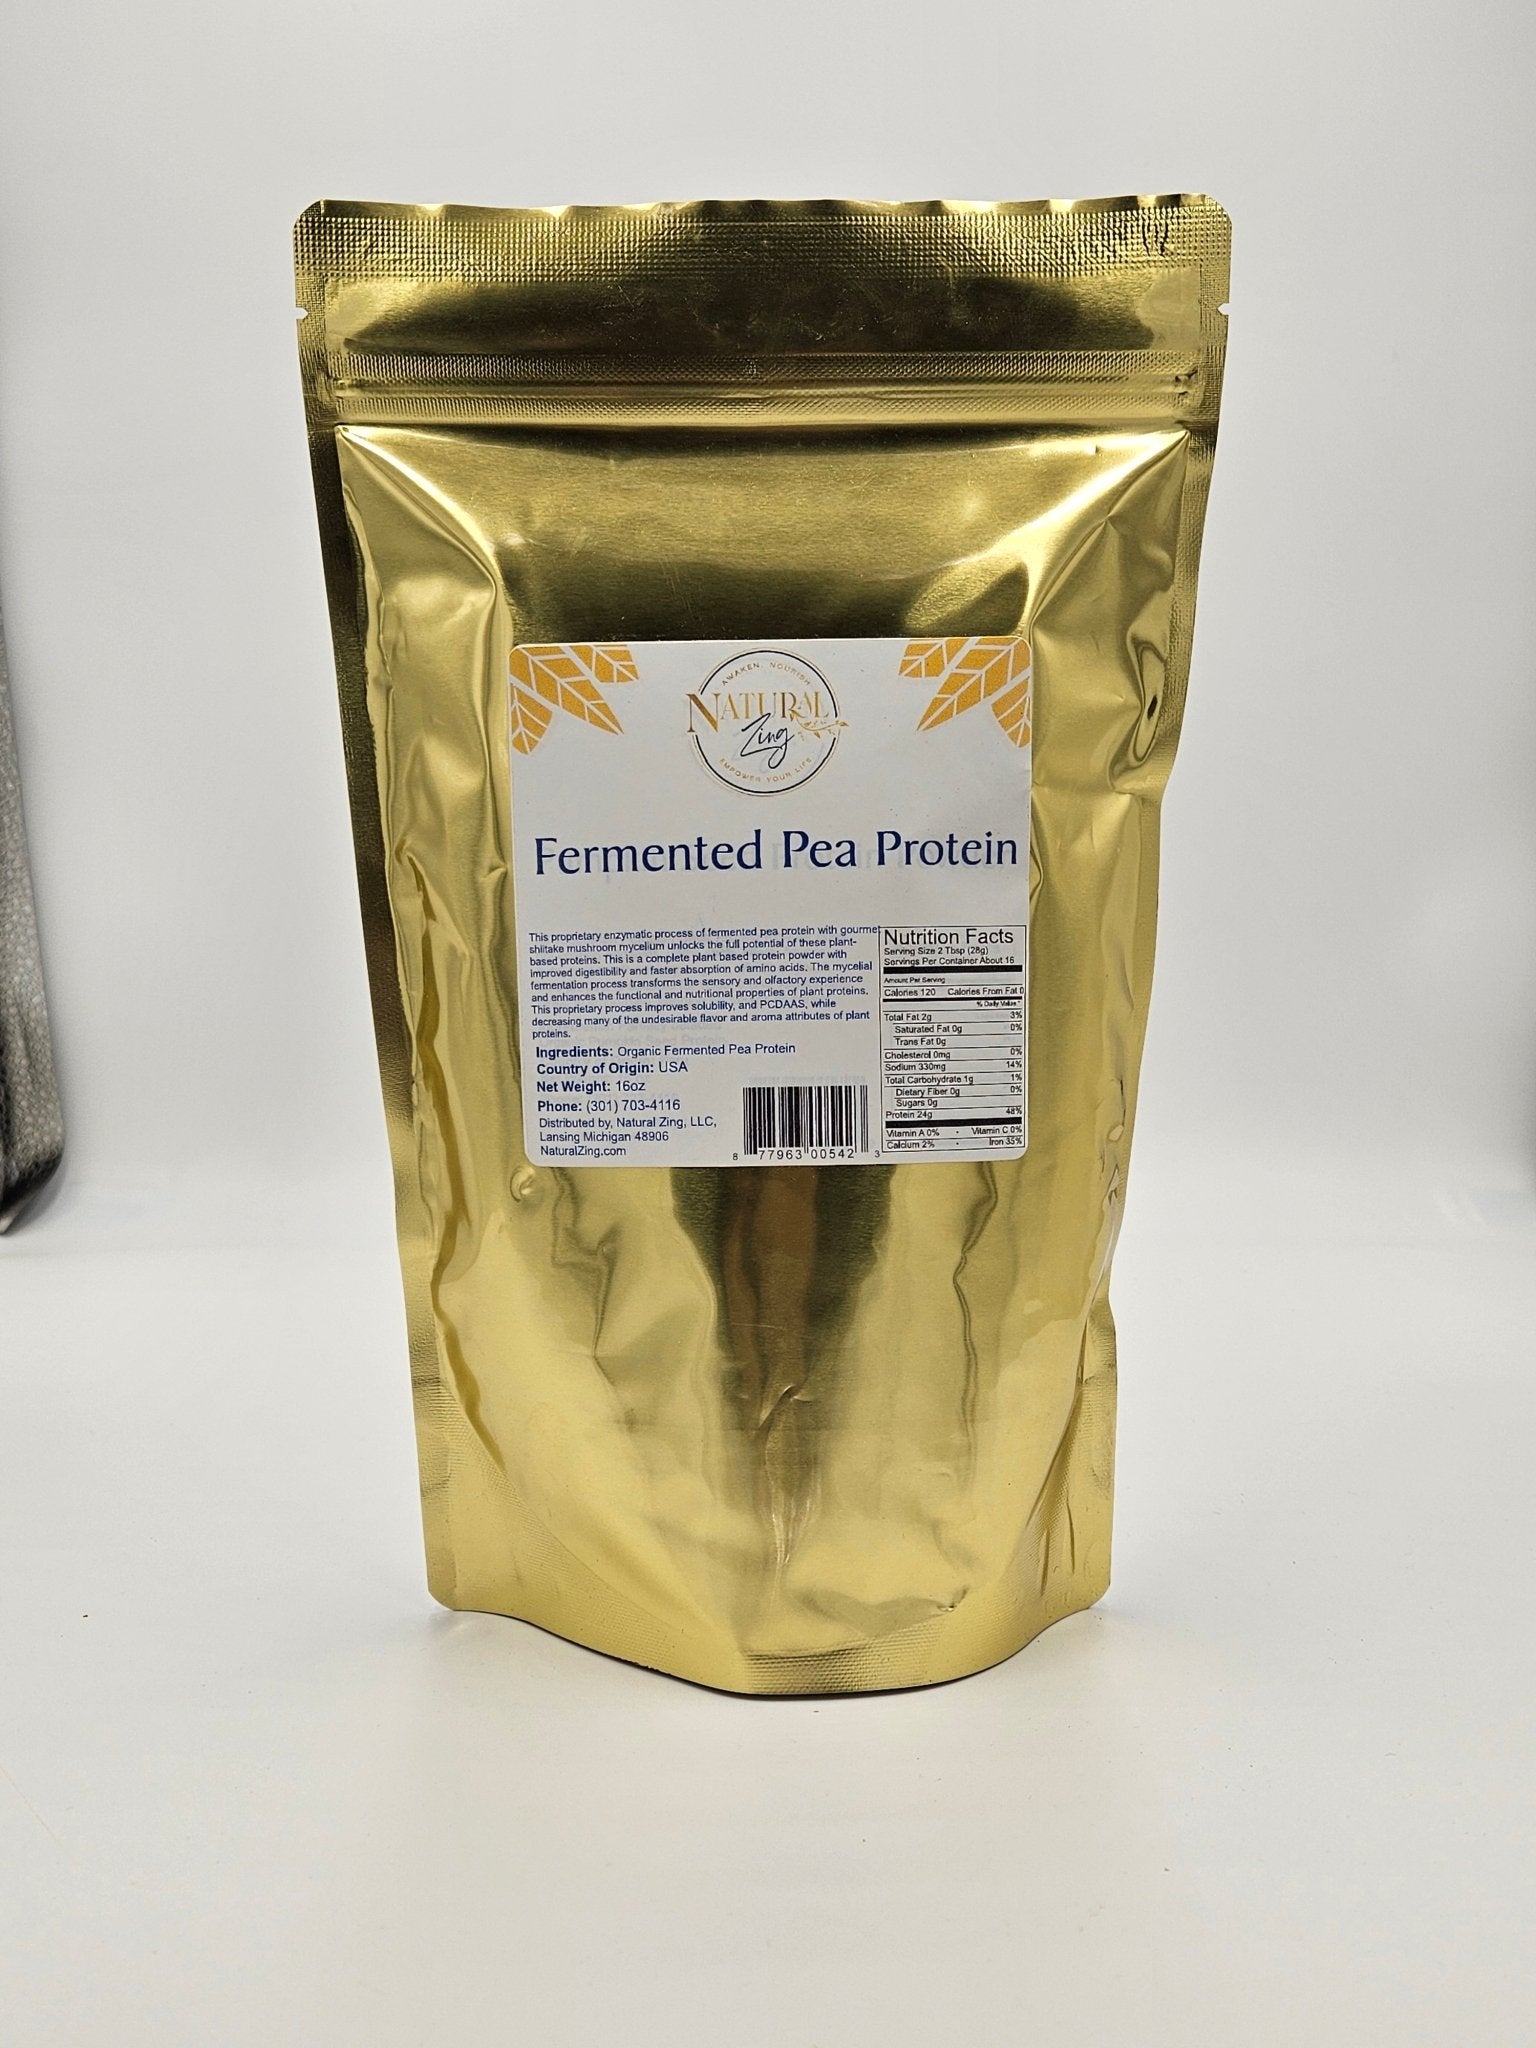 Fermented Pea Protein 16 oz - Natural Zing